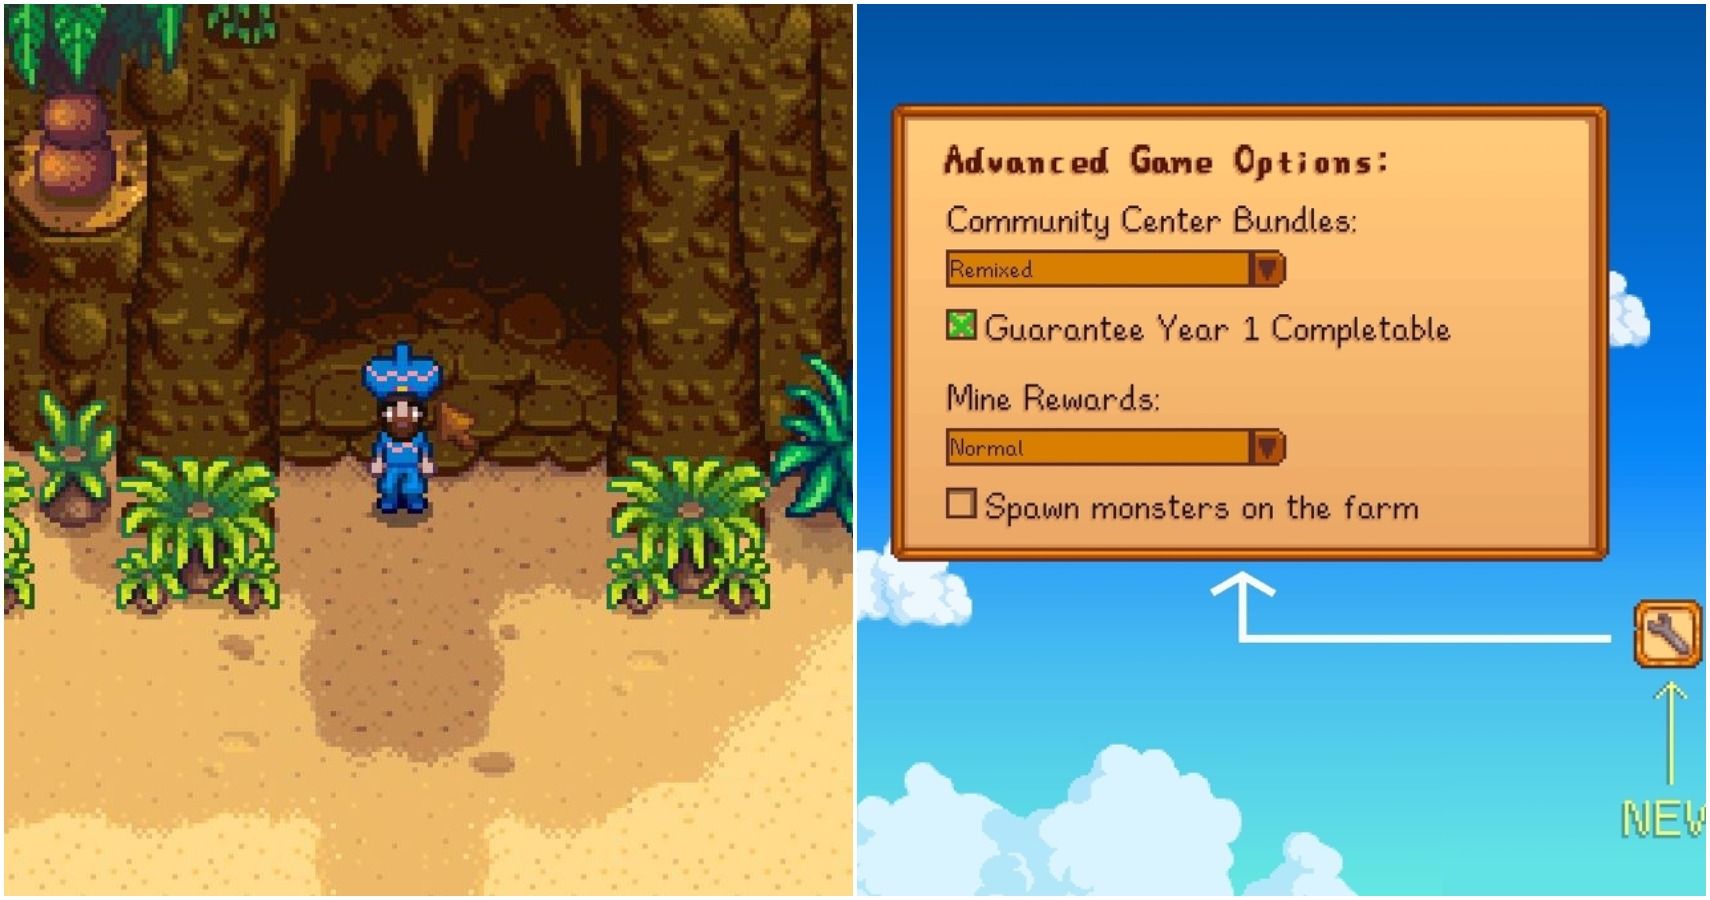 Stardew Valley' is getting an update with 'new game content